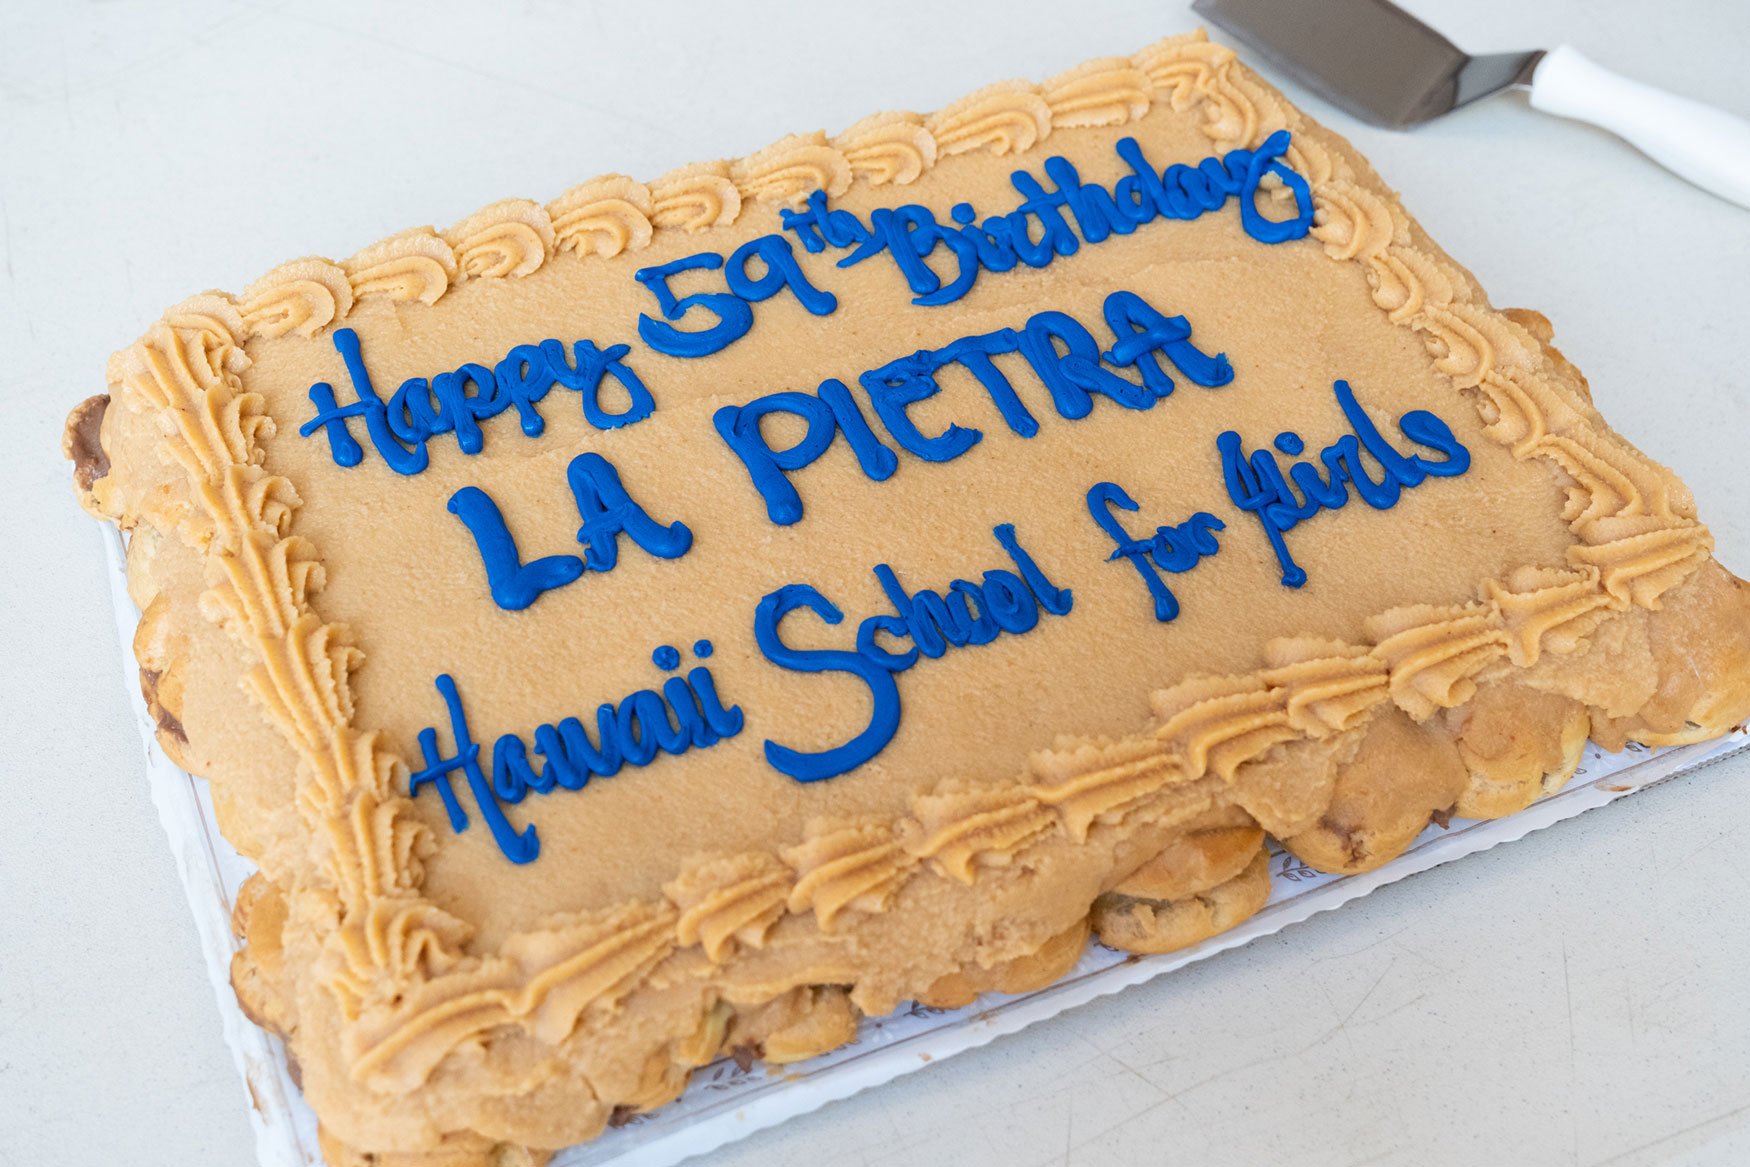 Students celebrate La Pietra's 59th anniversary with a delicious Coco Puff cake from Liliha Bakery!